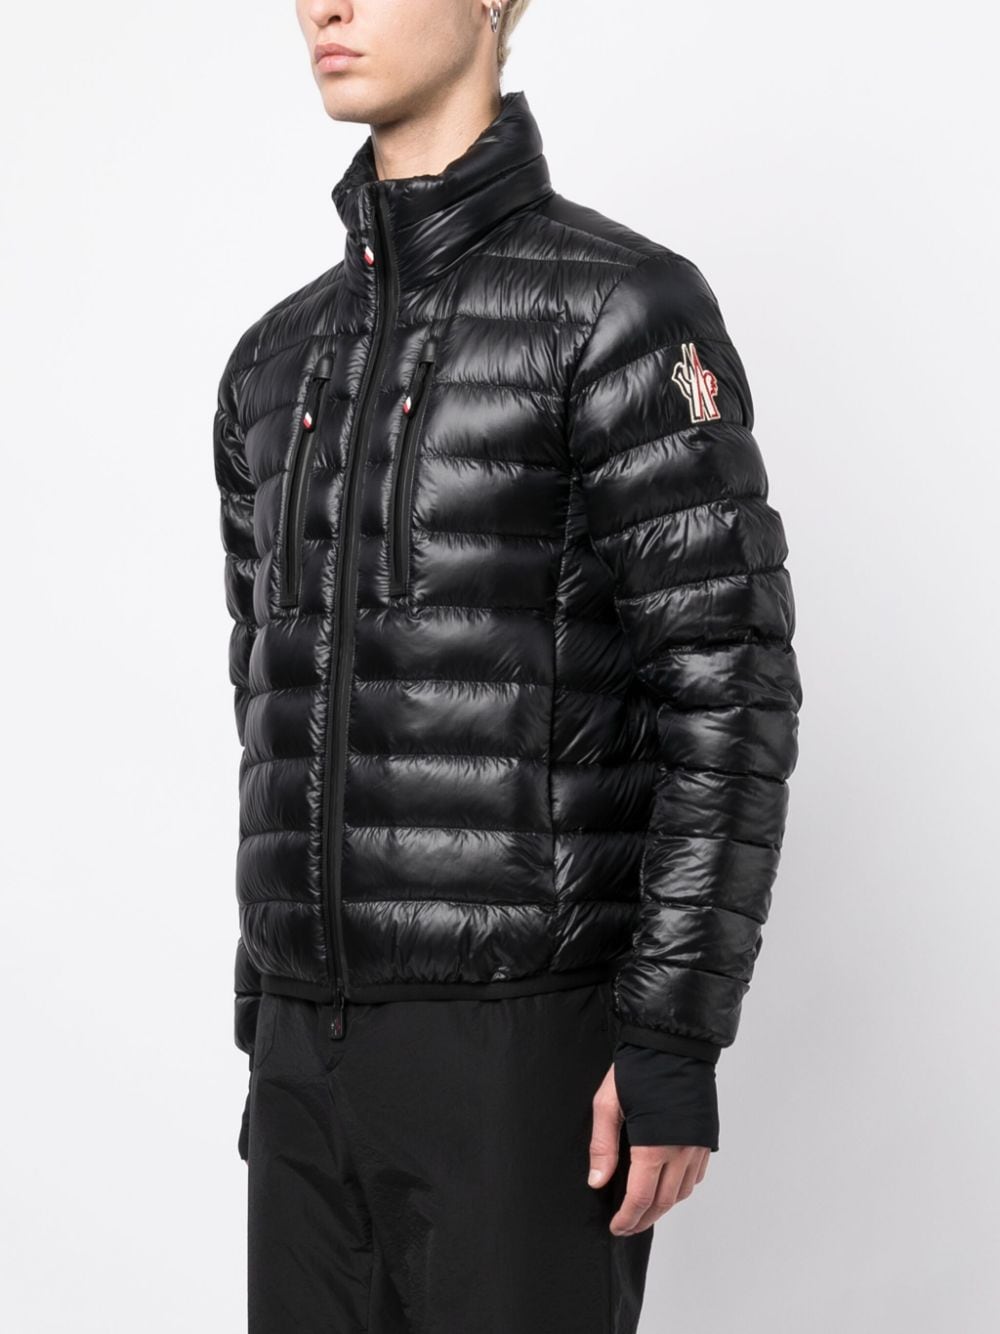 Moncler Grenoble for Men SS24 Collection